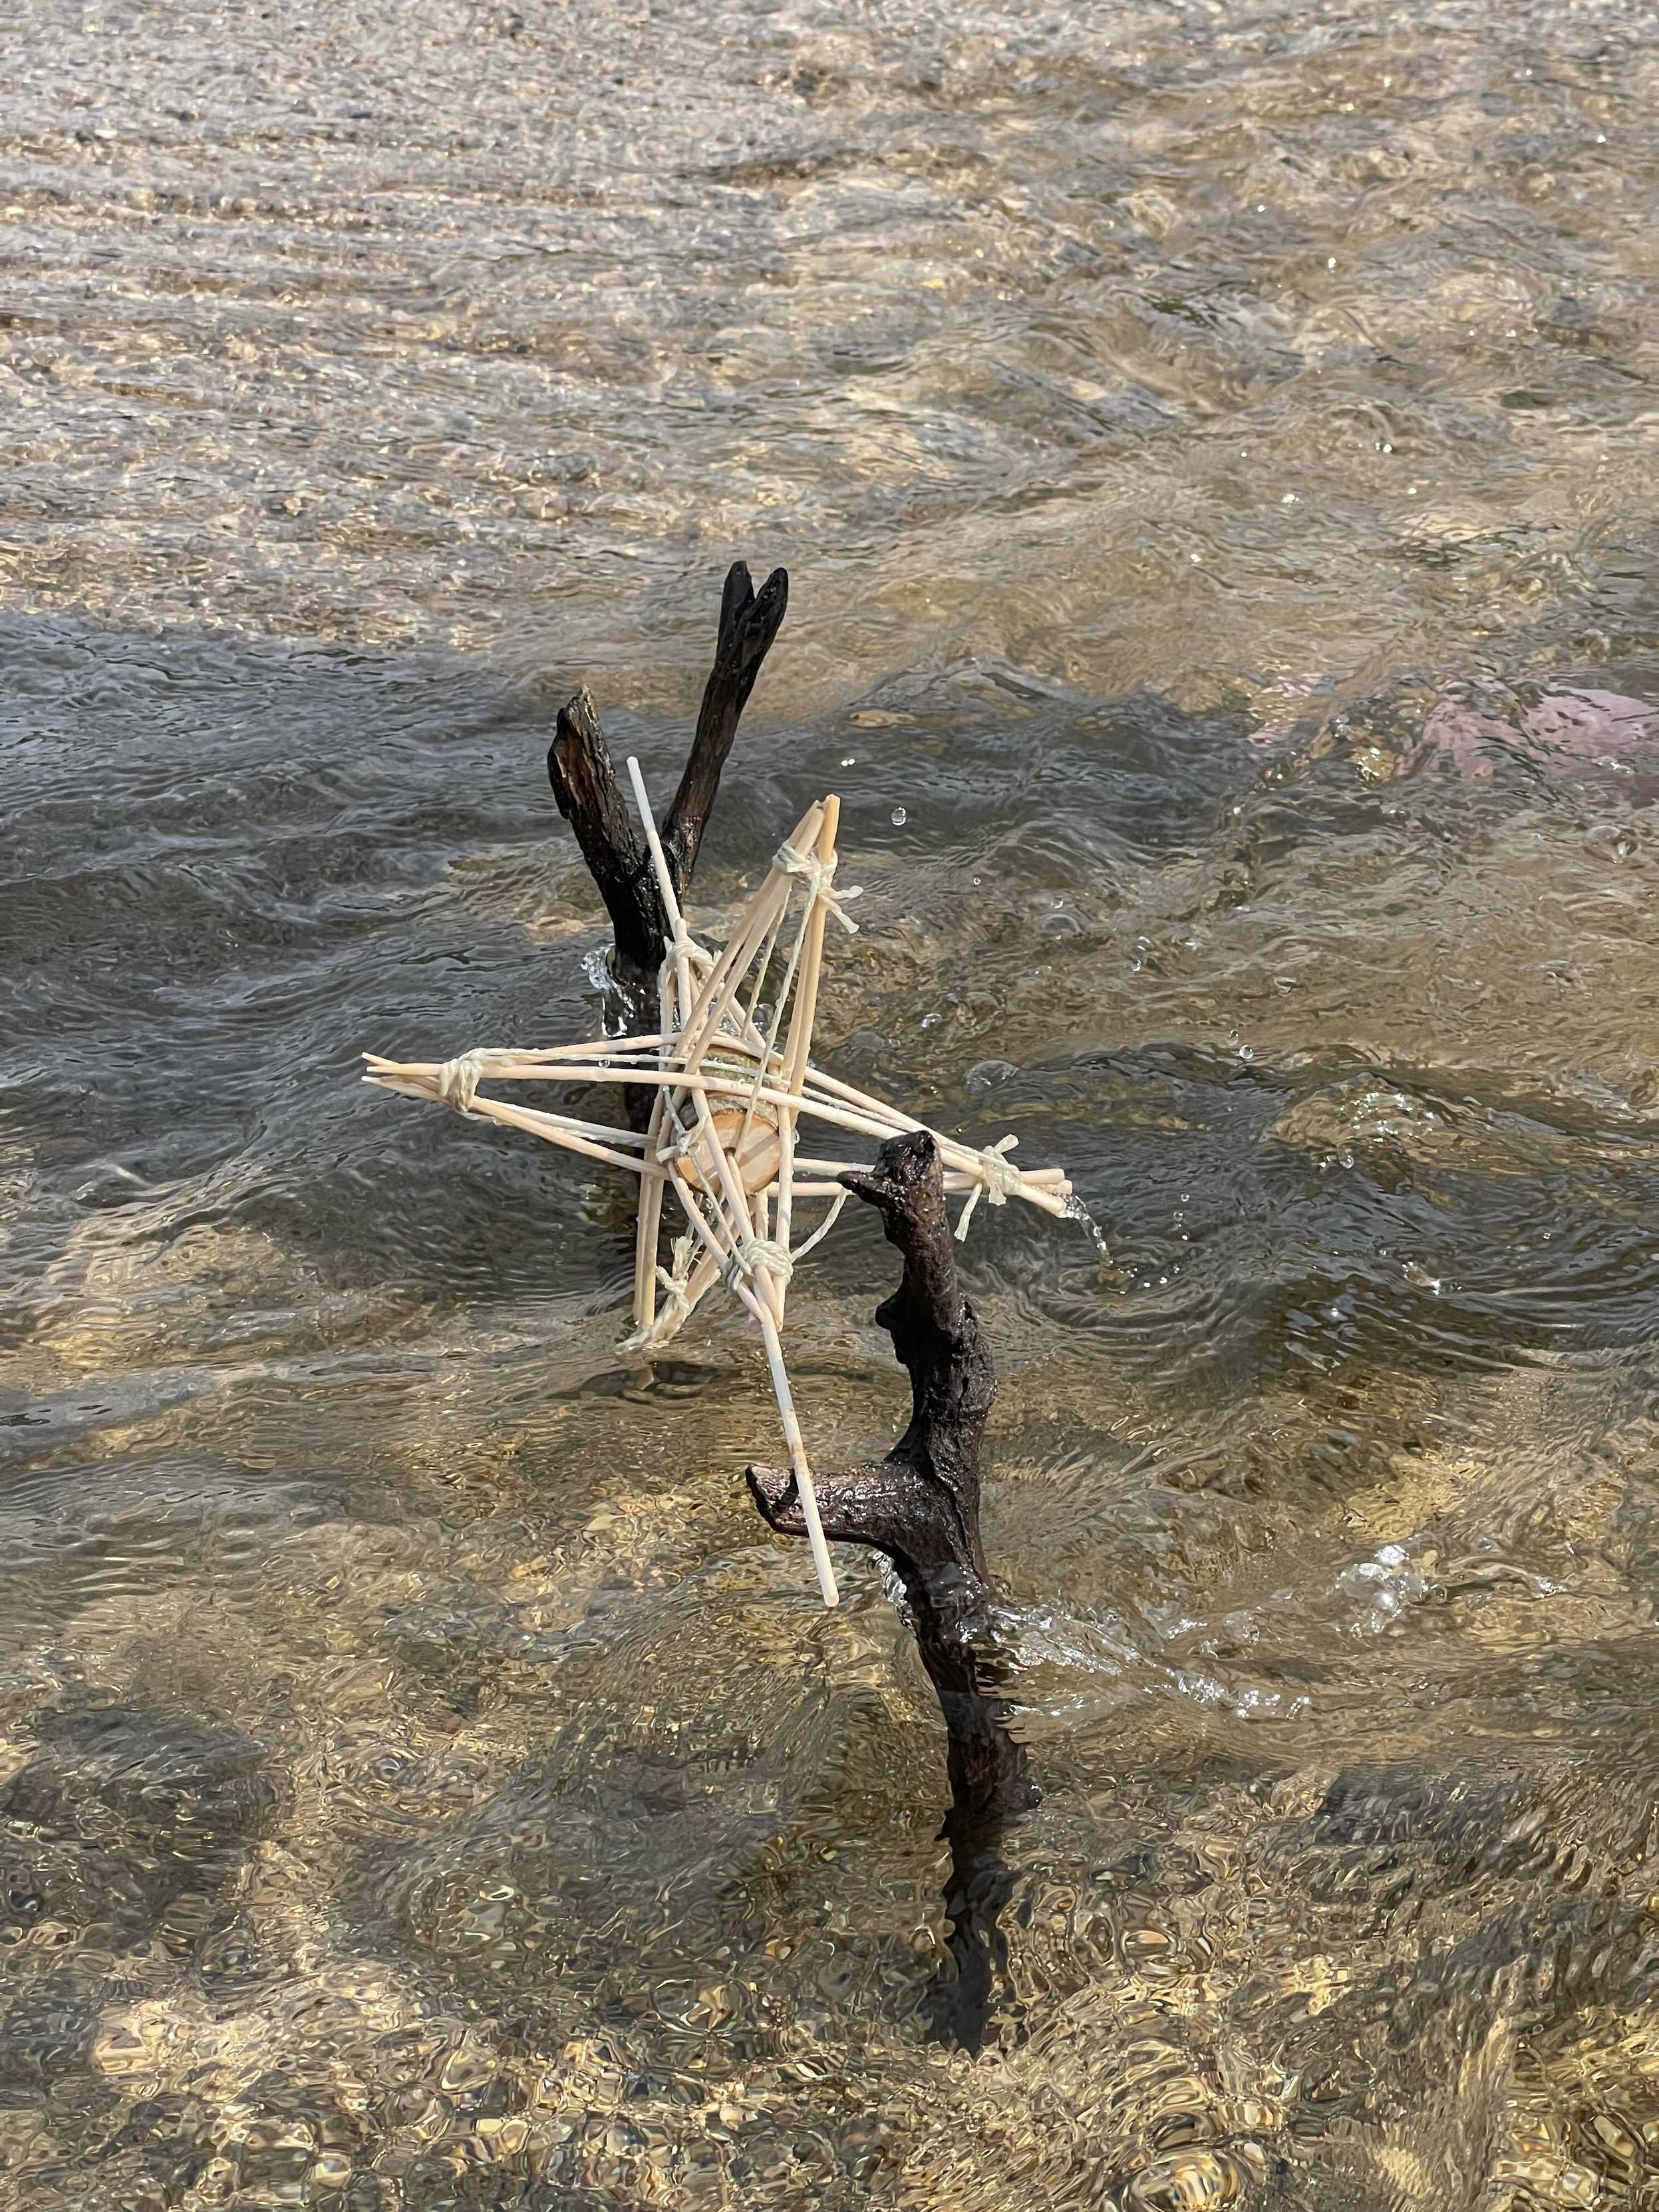 A wooden stick structure in the sand at a beach, partially submerged in shallow water.